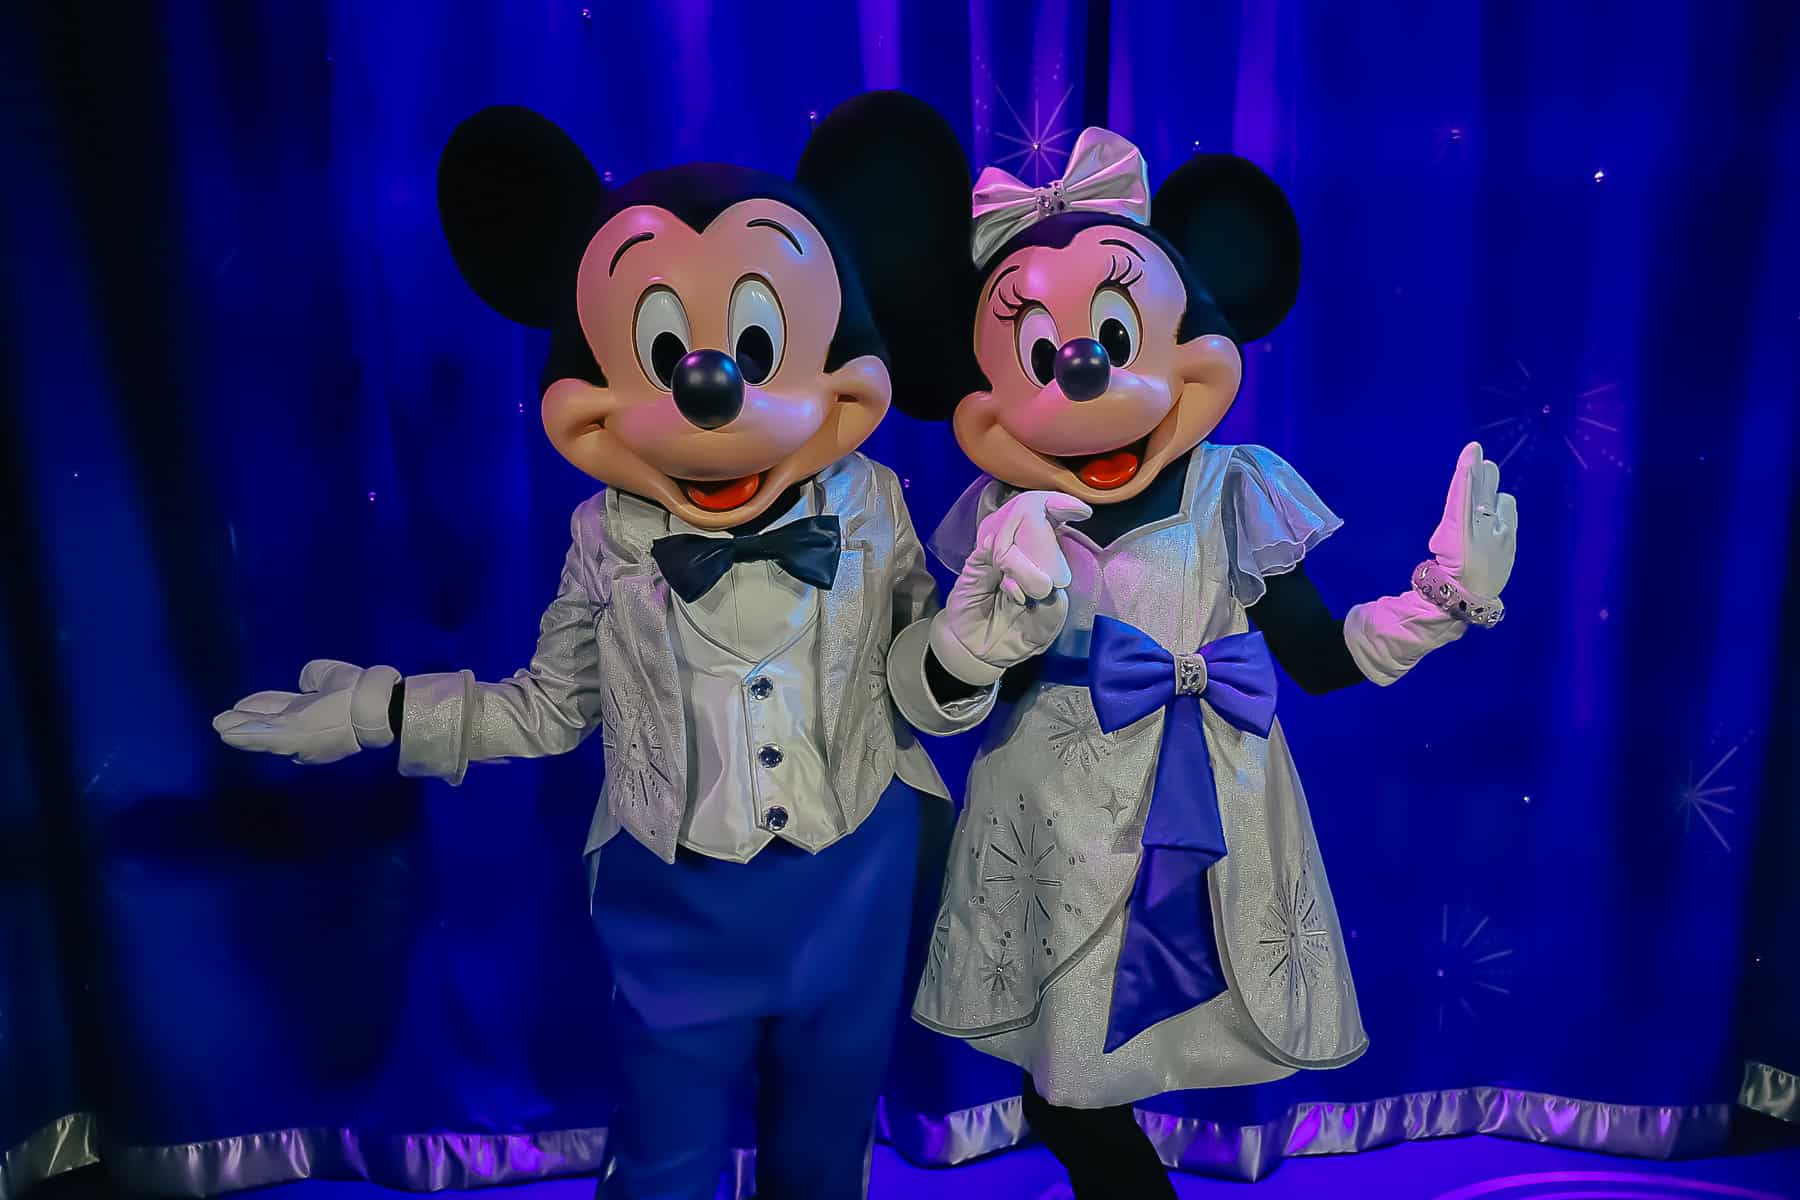 Meet Mickey and Minnie Mouse in Disney100 limited-time